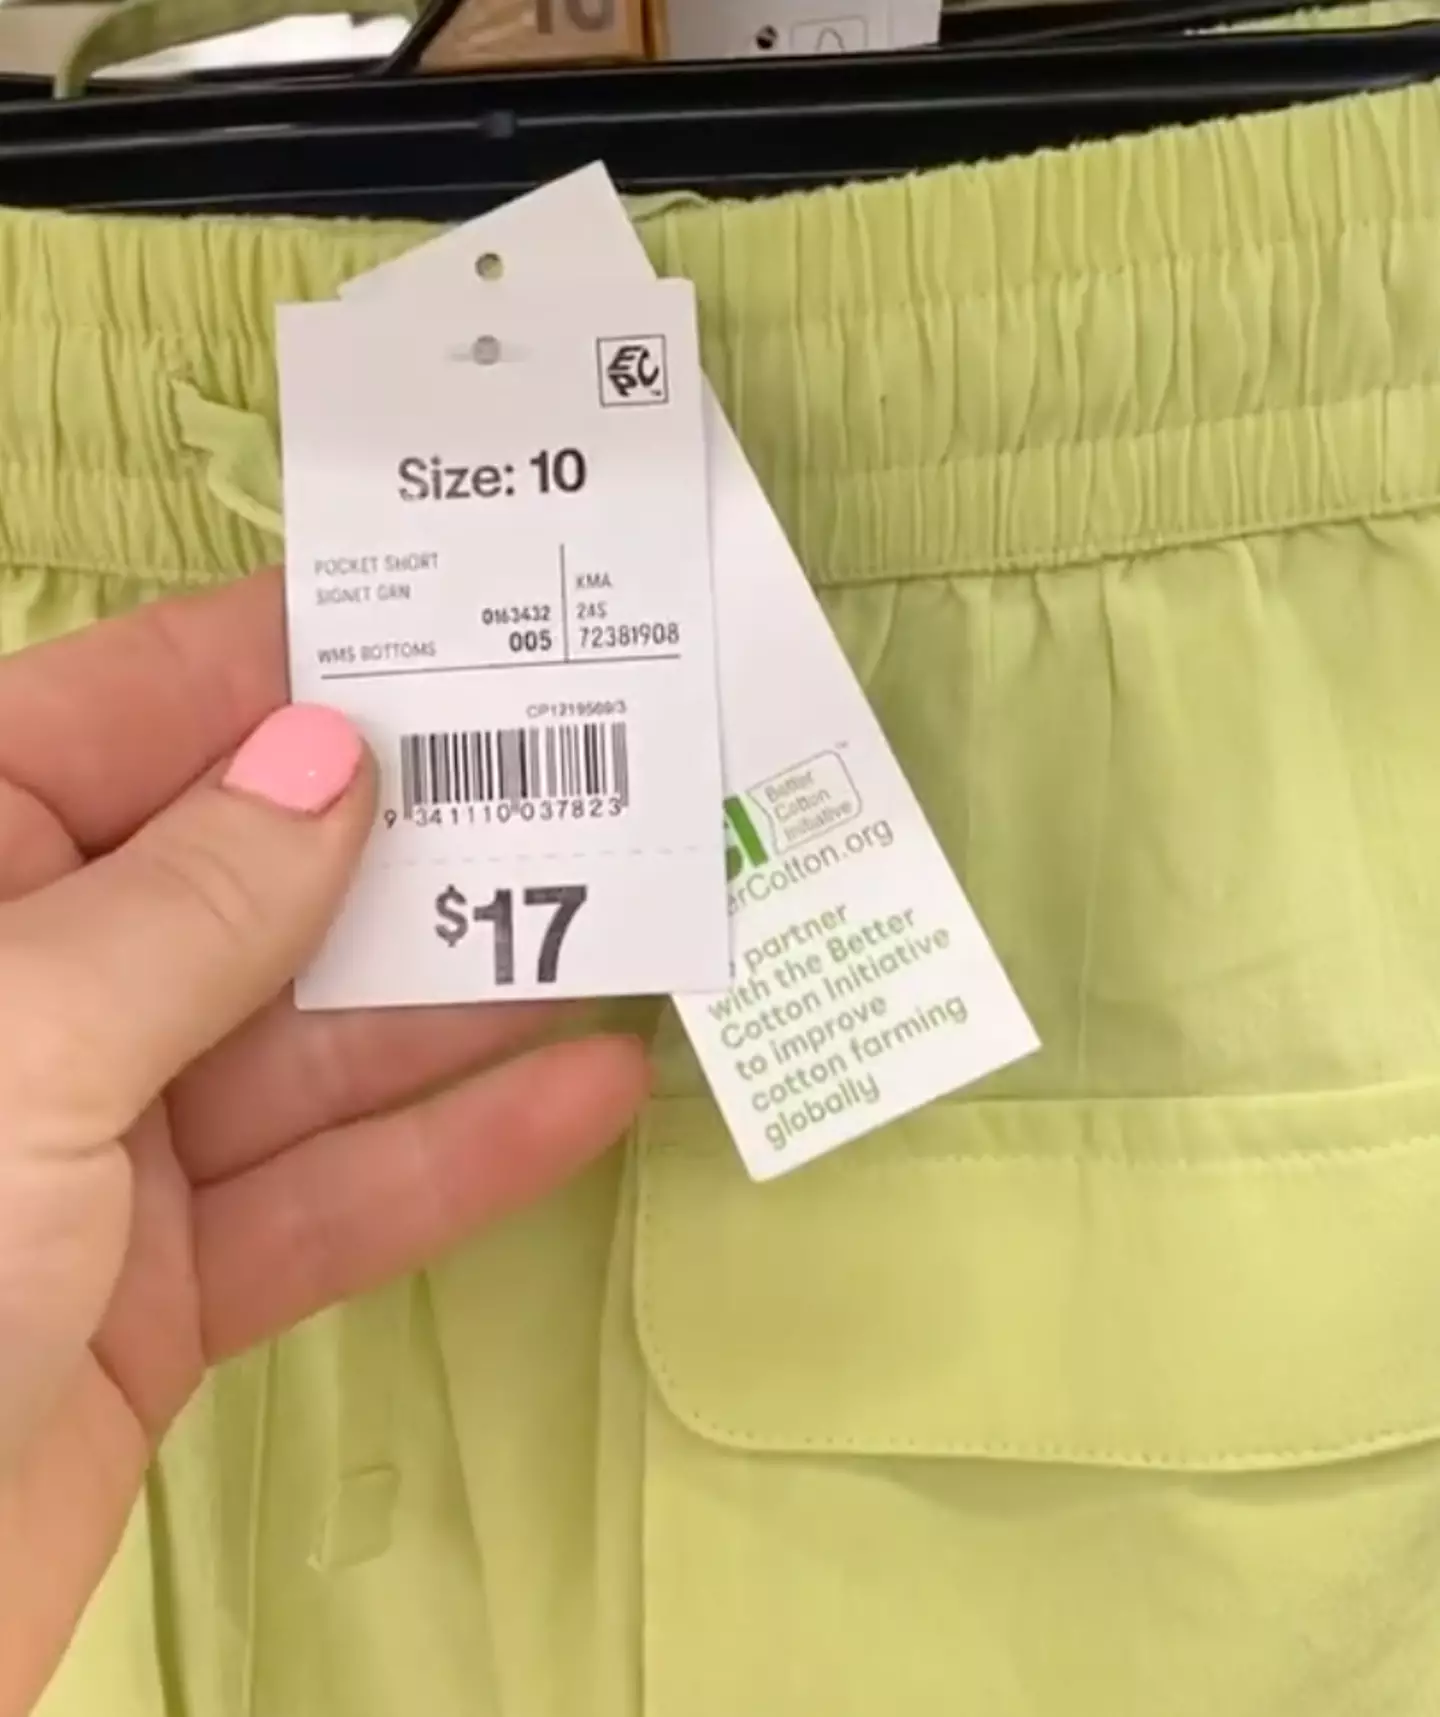 Monica noticed that there was a $2 difference between smaller and larger sizes in the same pair of shorts.